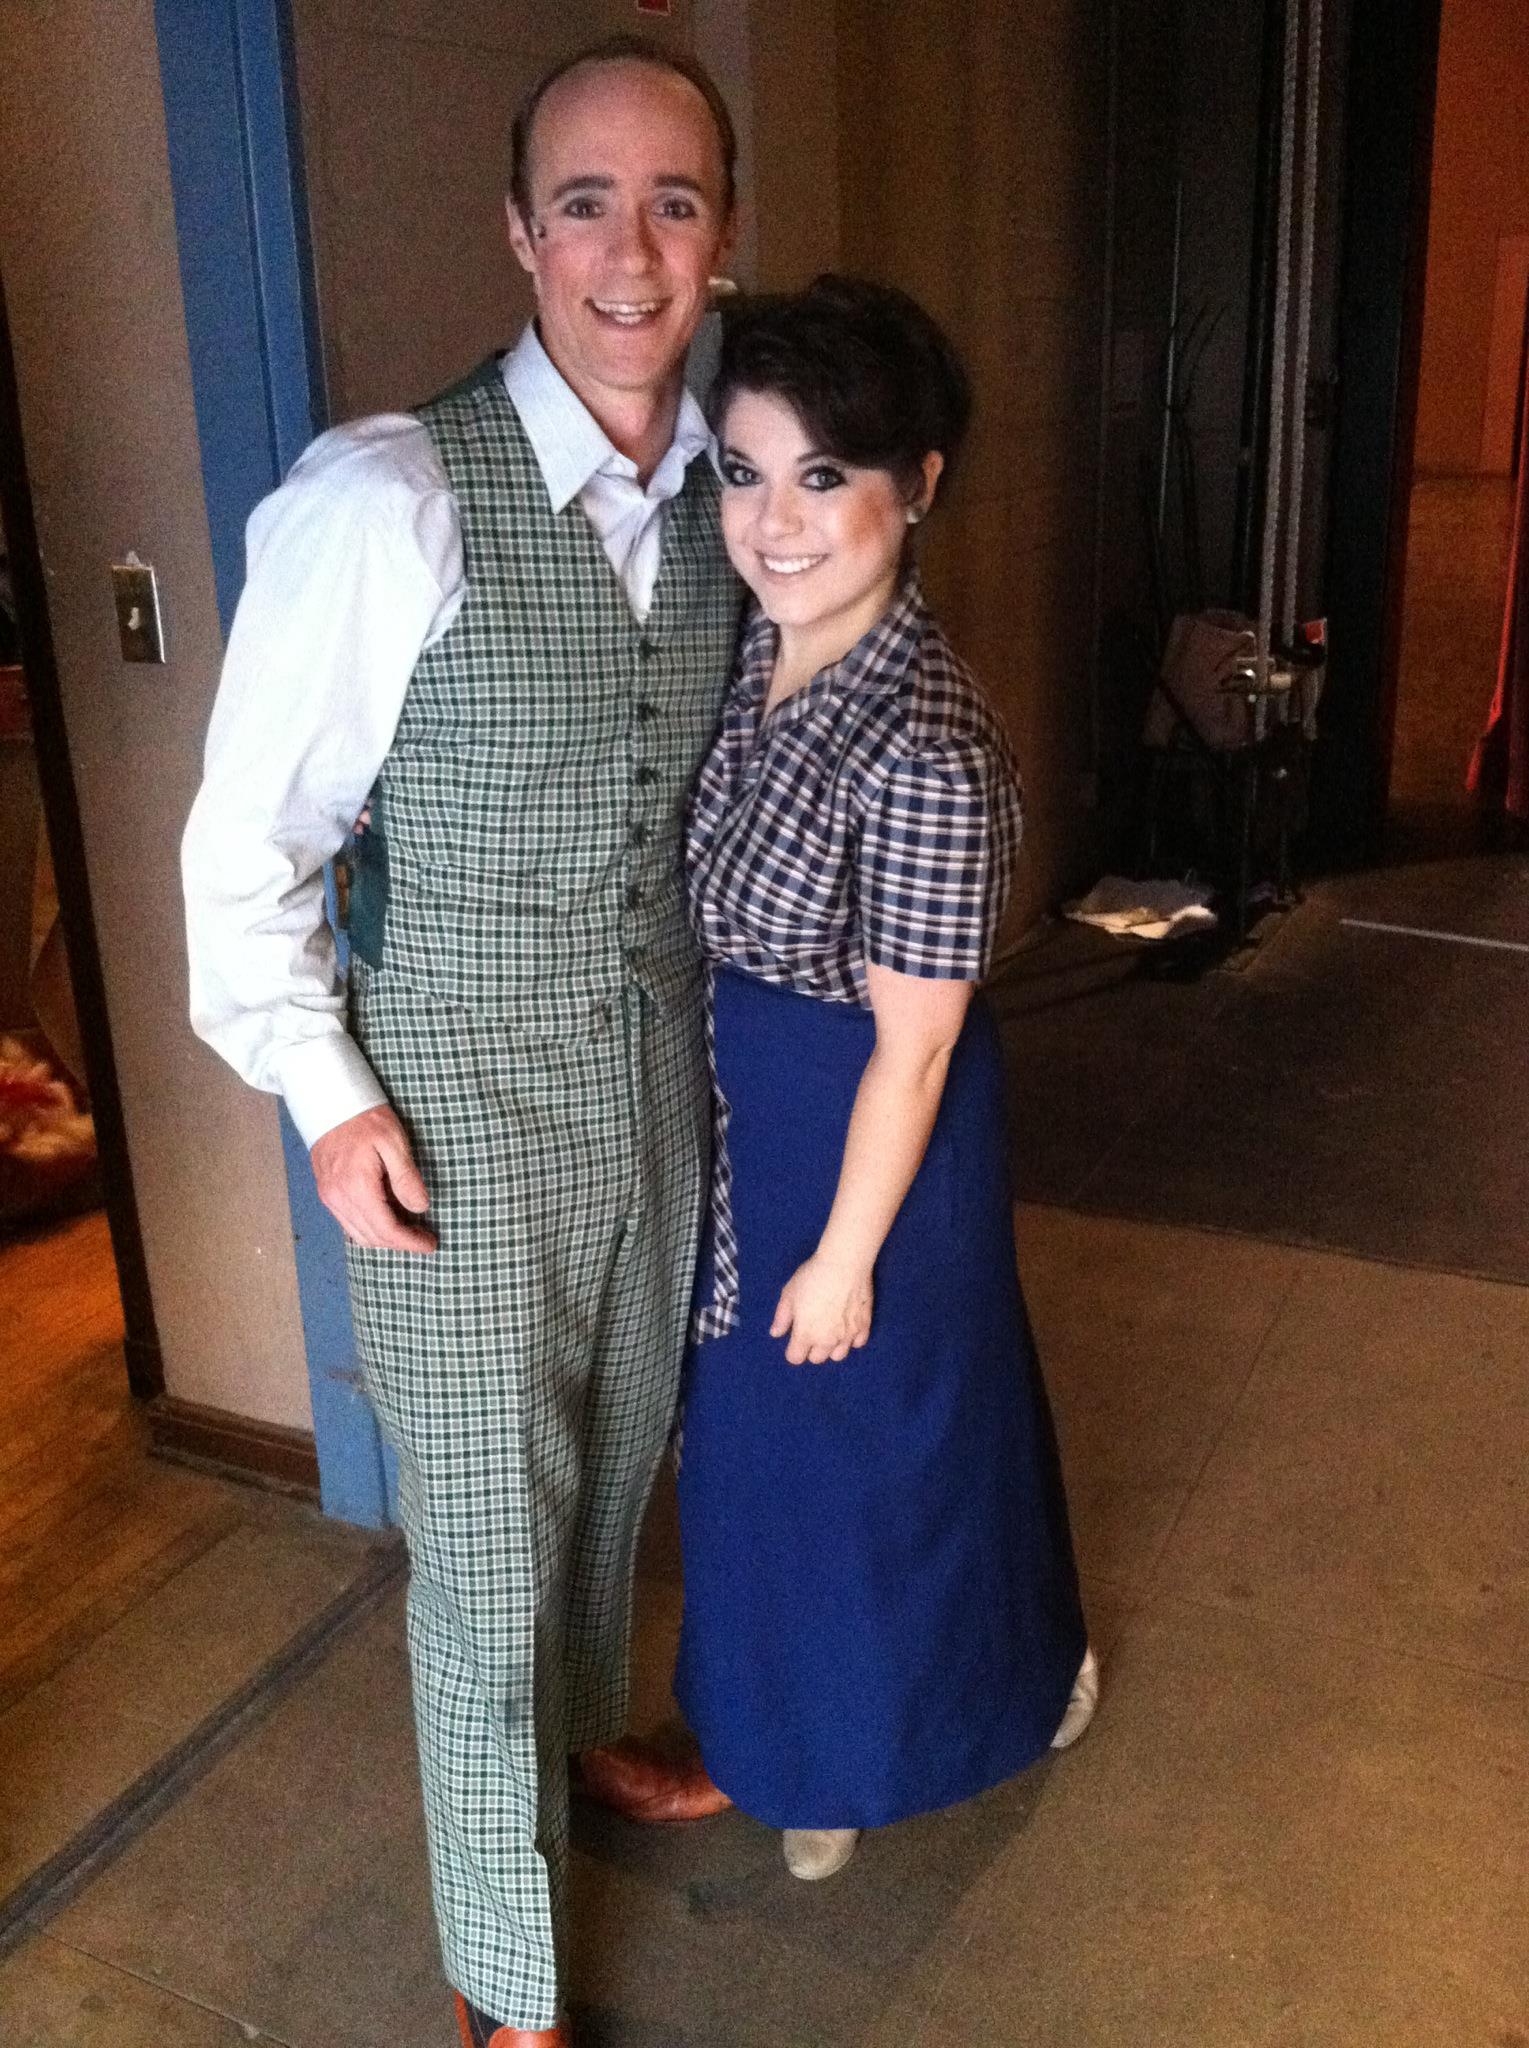 Caitlin Gallogly (r) and Michael James Thatcher starring in The Music Man (2012)